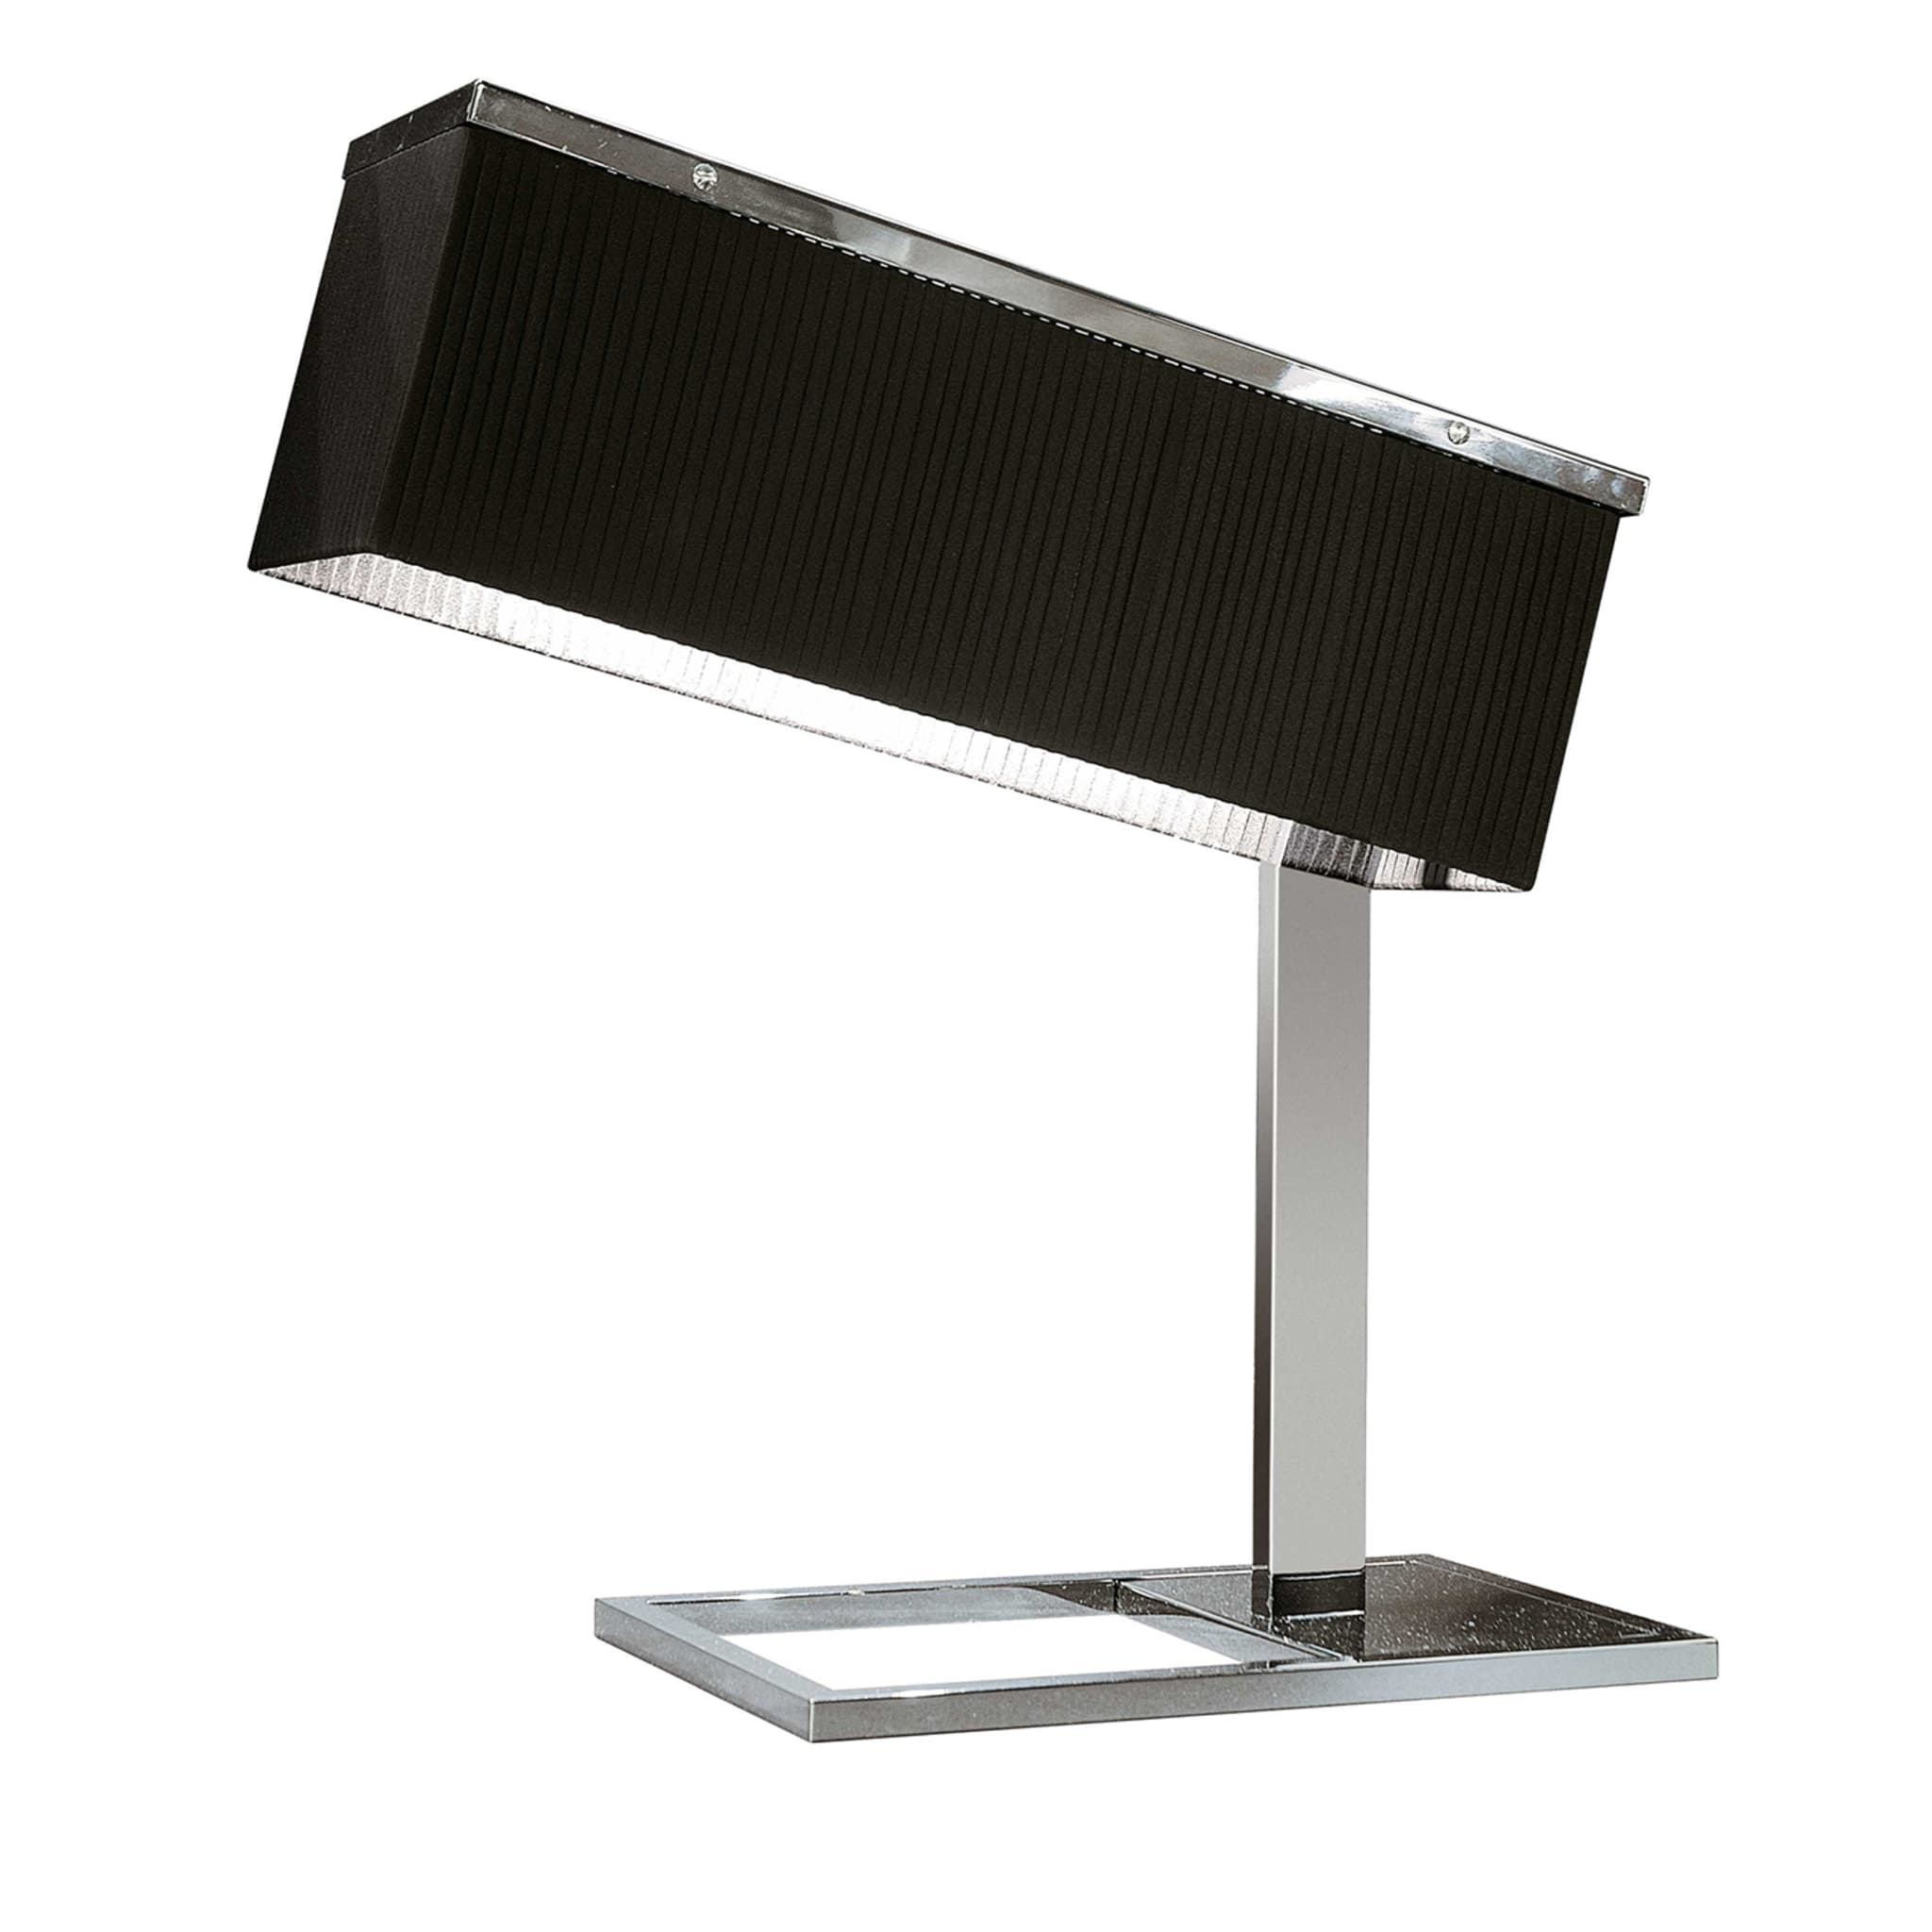 Gimko M Black Table Lamp by Arch. Luca Sgroi - Main view